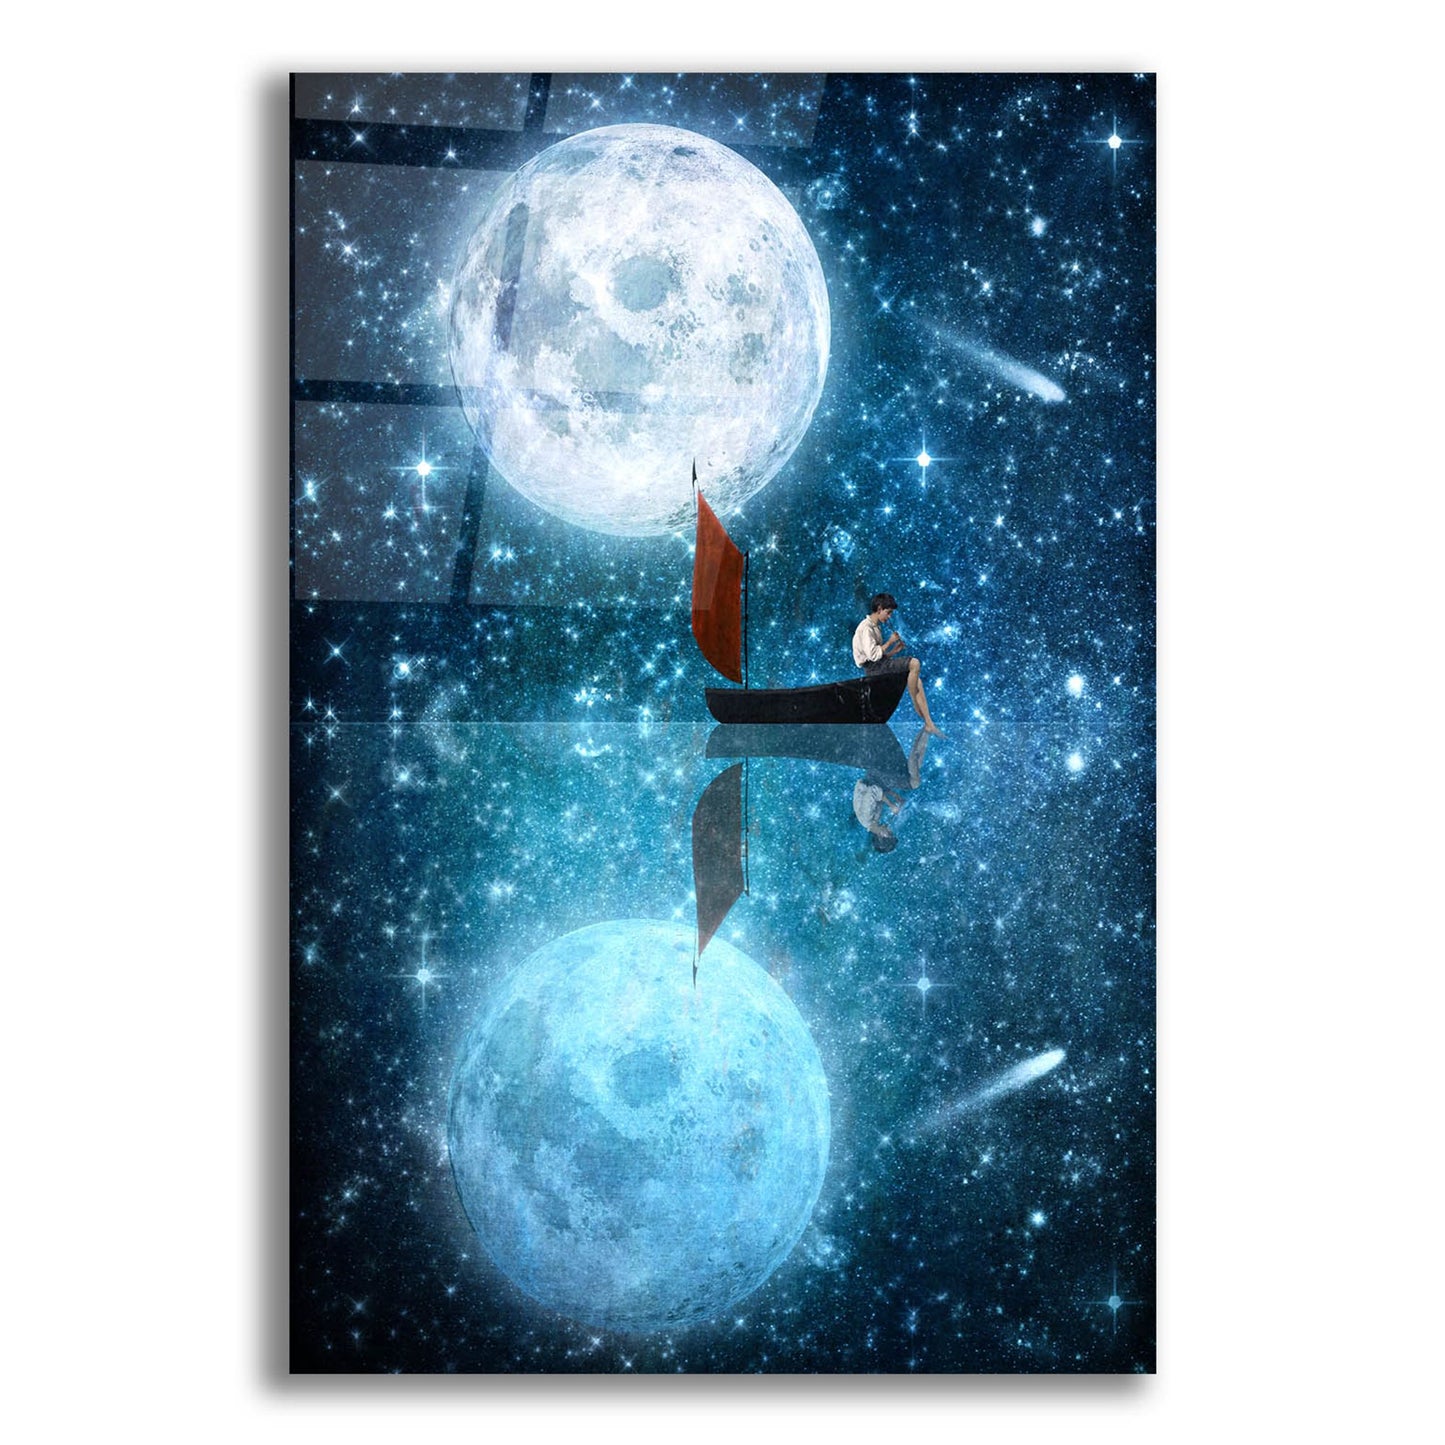 Epic Art 'The Moon And Me' by Diogo Verissimo, Acrylic Glass Wall Art